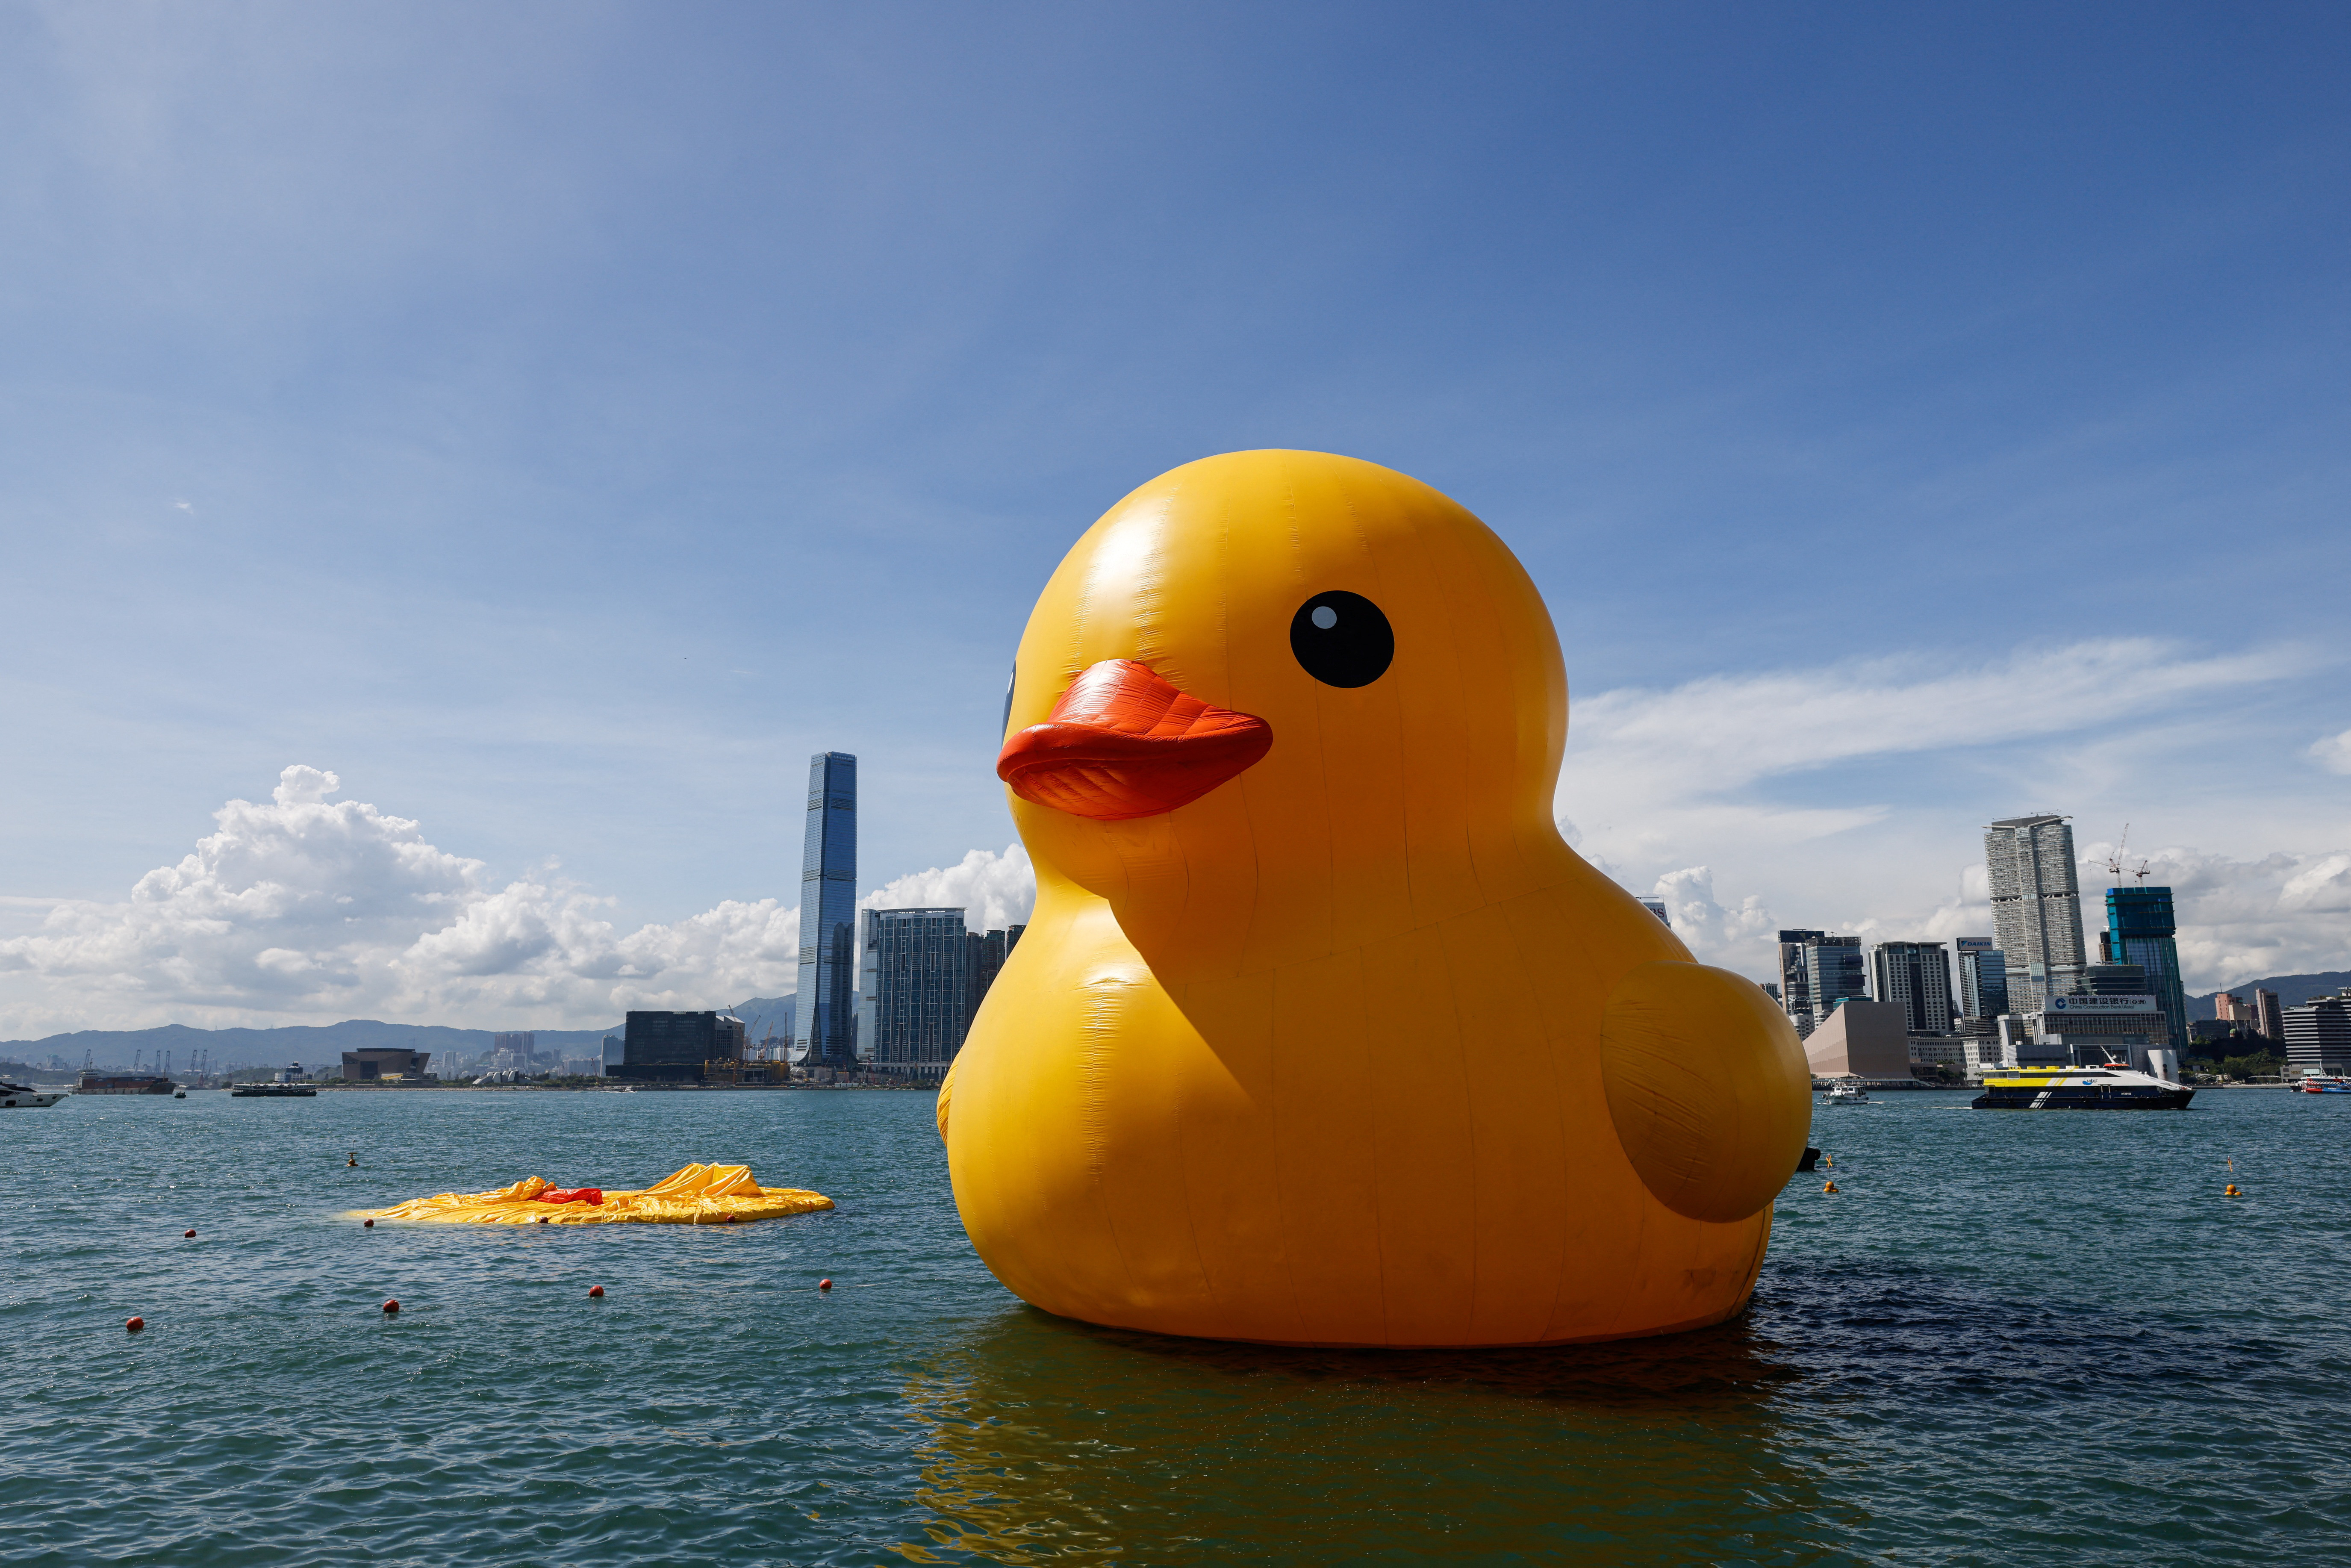 One of the inflatable yellow ducks created by Dutch artist Florentijn Hofman is seen deflated at Victoria Harbour in Hong Kong